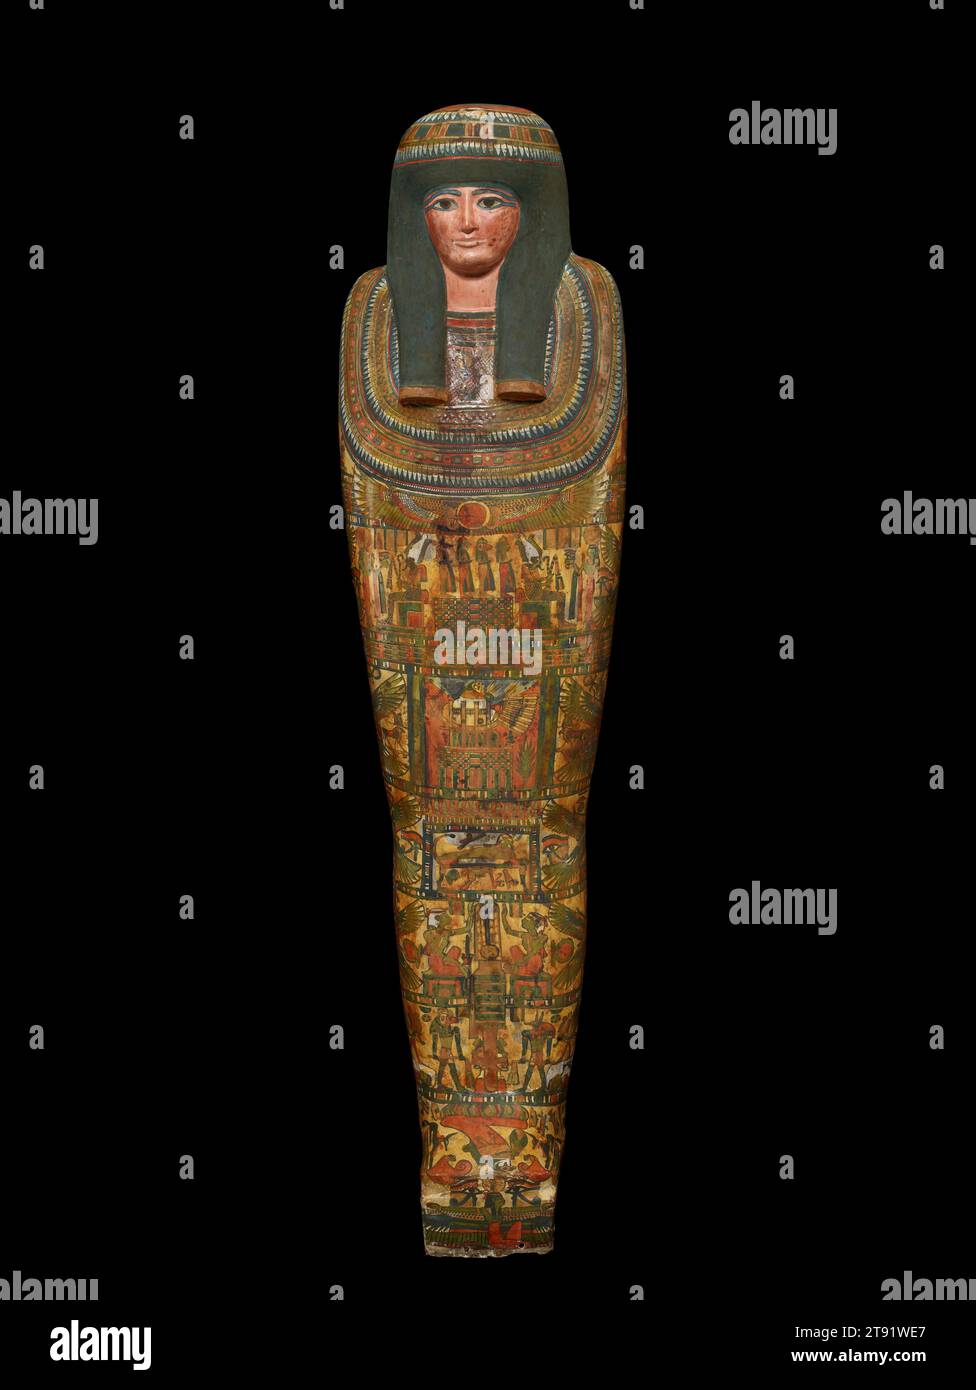 Cartonnage of Lady Tashat, 945-712 BCE, 67 in. (170.2 cm), Painted and varnished linen, Egypt, 11th-8th century BCE, This coffin and cartonnage (mummy case) were created for Lady Tashat, the daughter of the provincial governor Djehutyhotep (pronounced 'je-hooti-HO-tep' meaning 'doorkeeper of the gold-house of Amen'). The coffin and cartonnage take the form of mummies with idealized faces, huge floral collars, and chest ornaments in the form of a winged sun disk. While the coffin exterior has only a single line of inscription down the center of the lid and another around the rim of the box Stock Photo